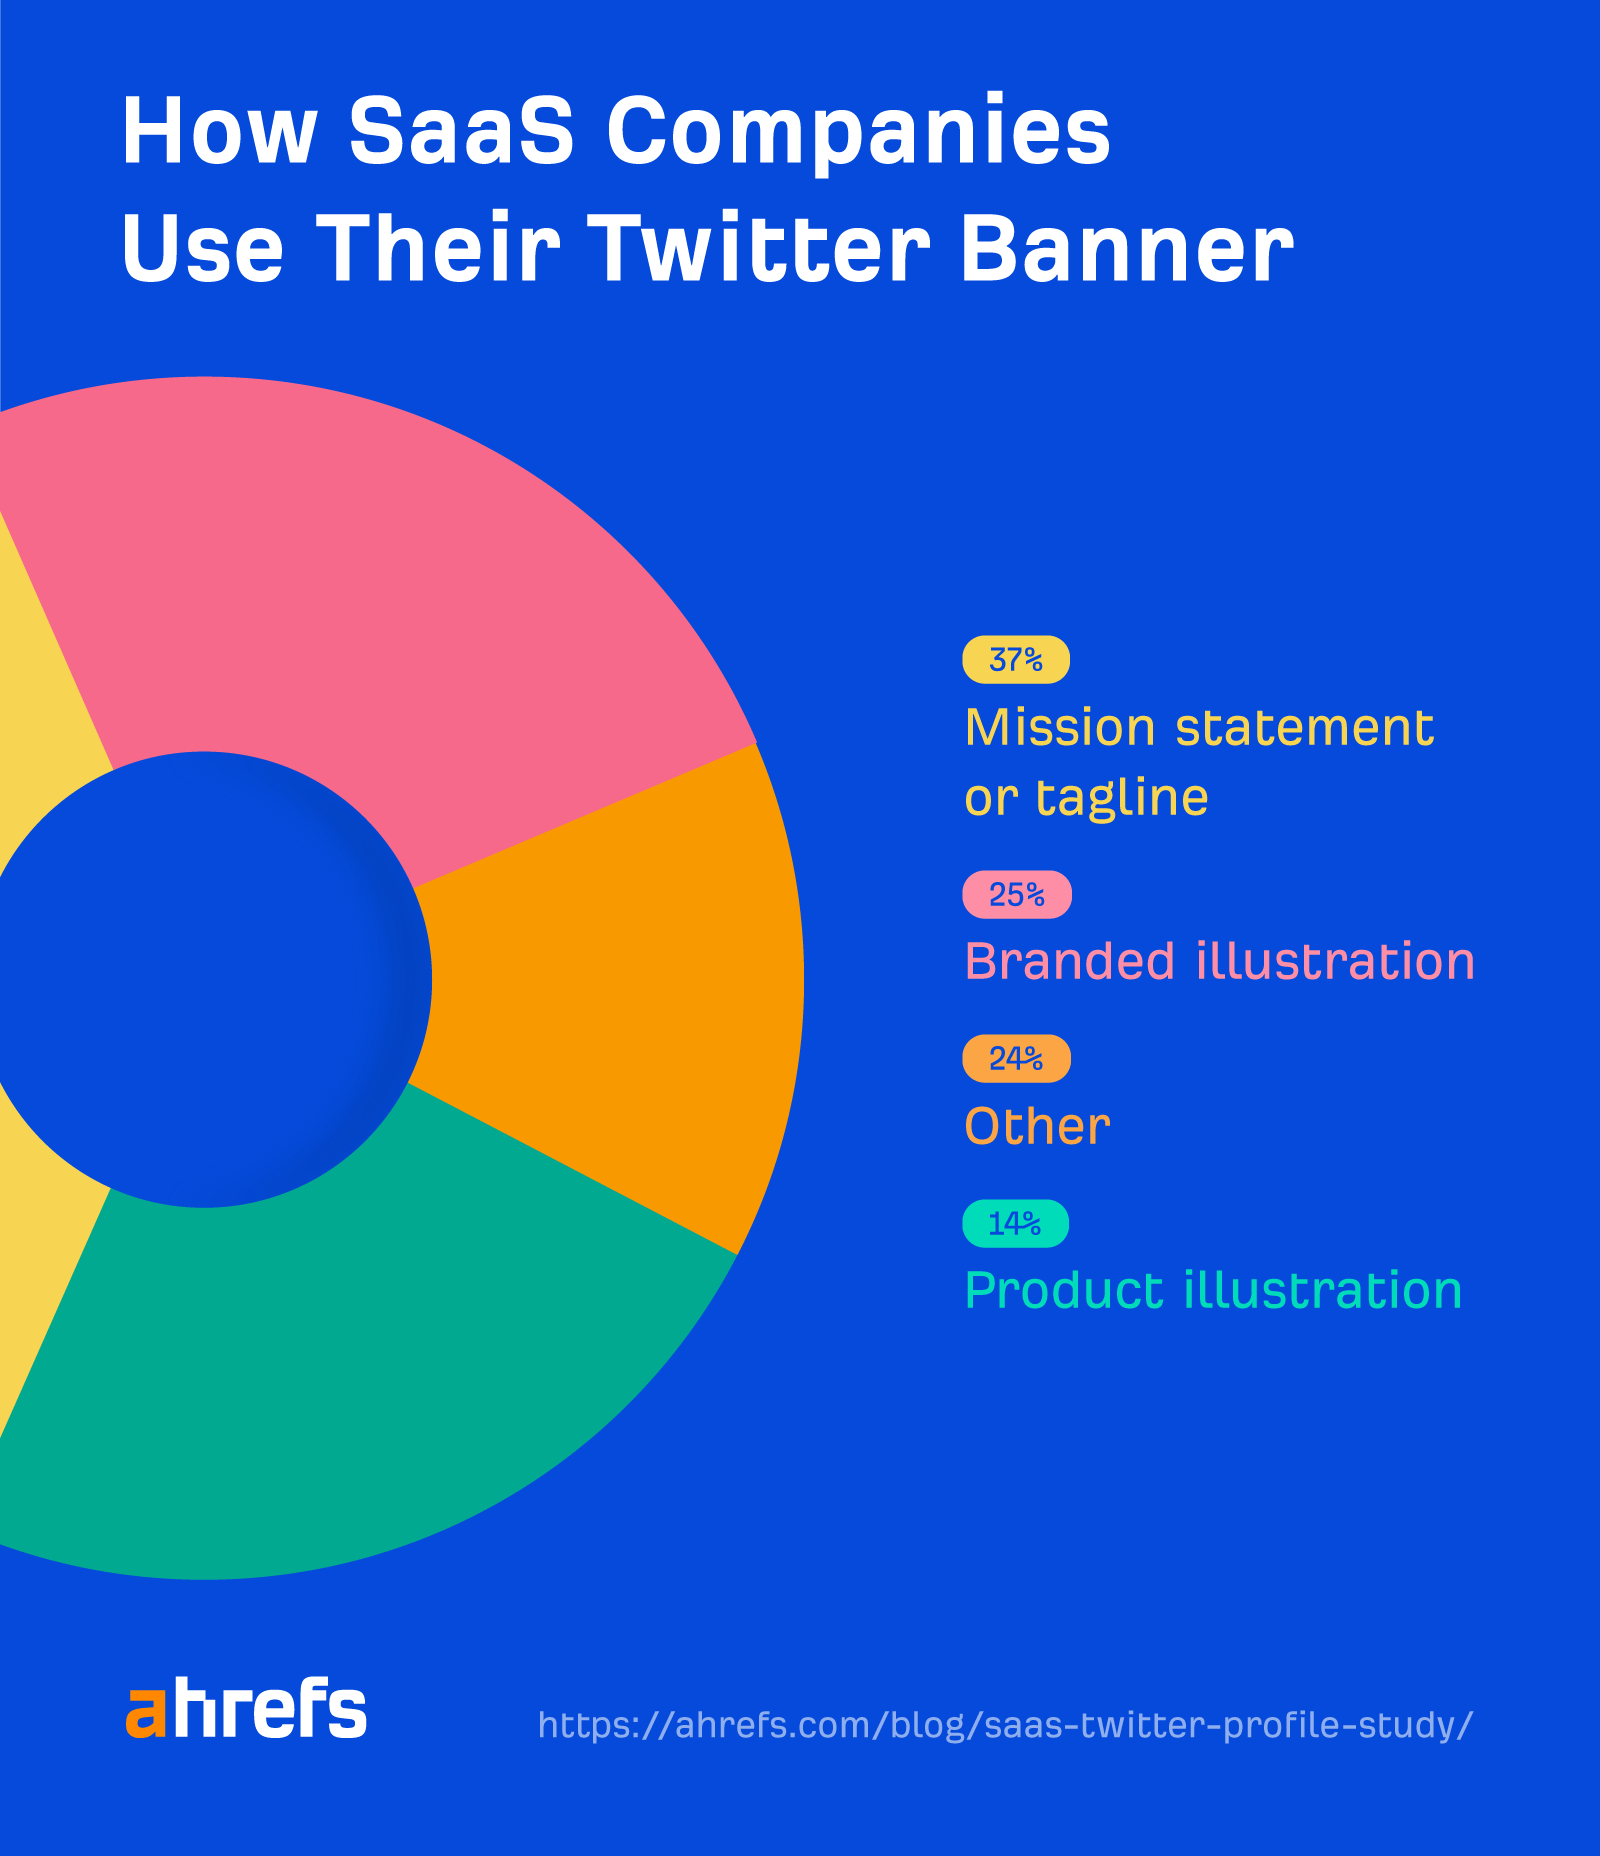 How SaaS companies use their Twitter banner